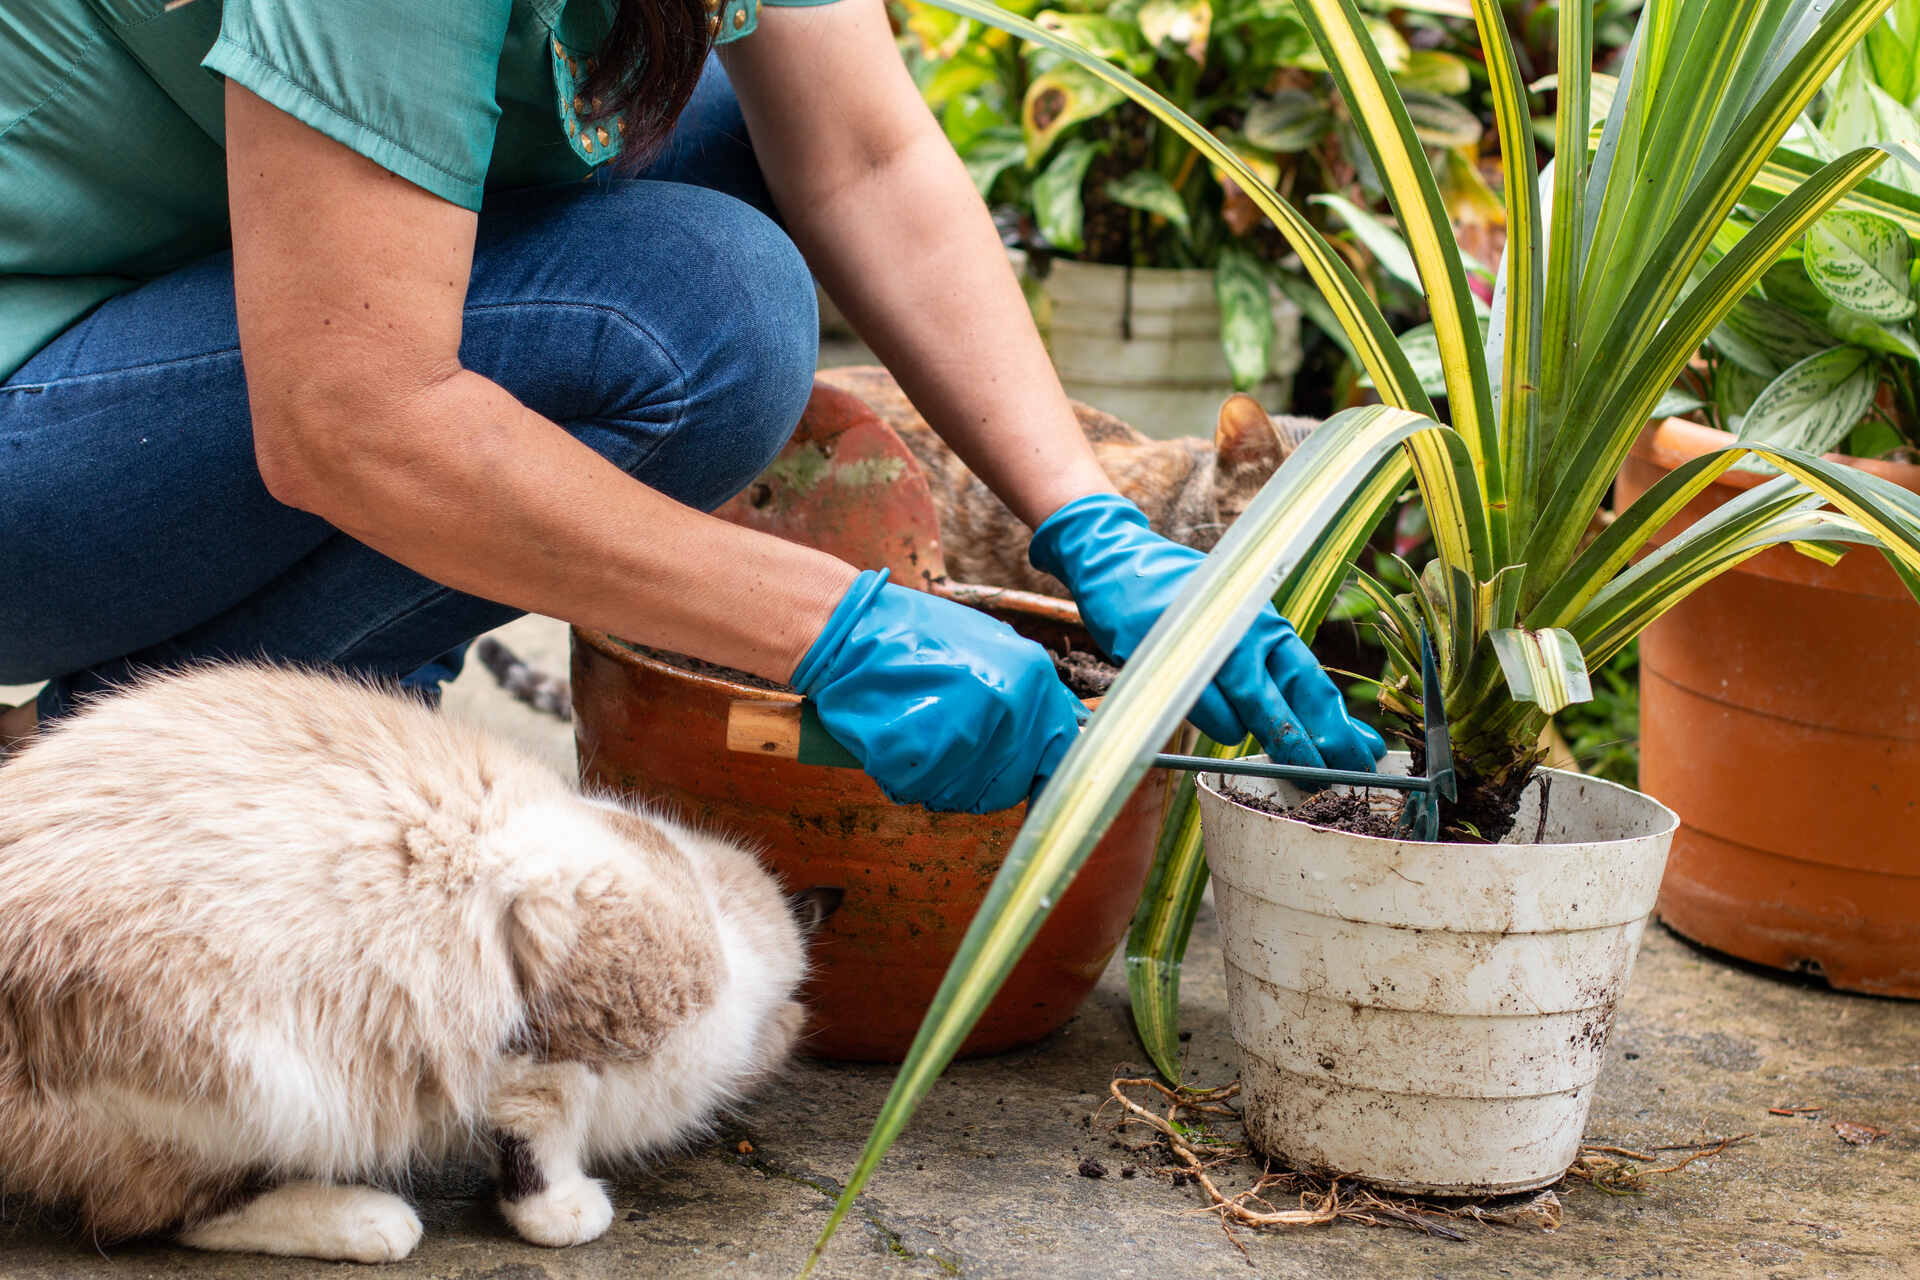 A woman gardening next to her cat